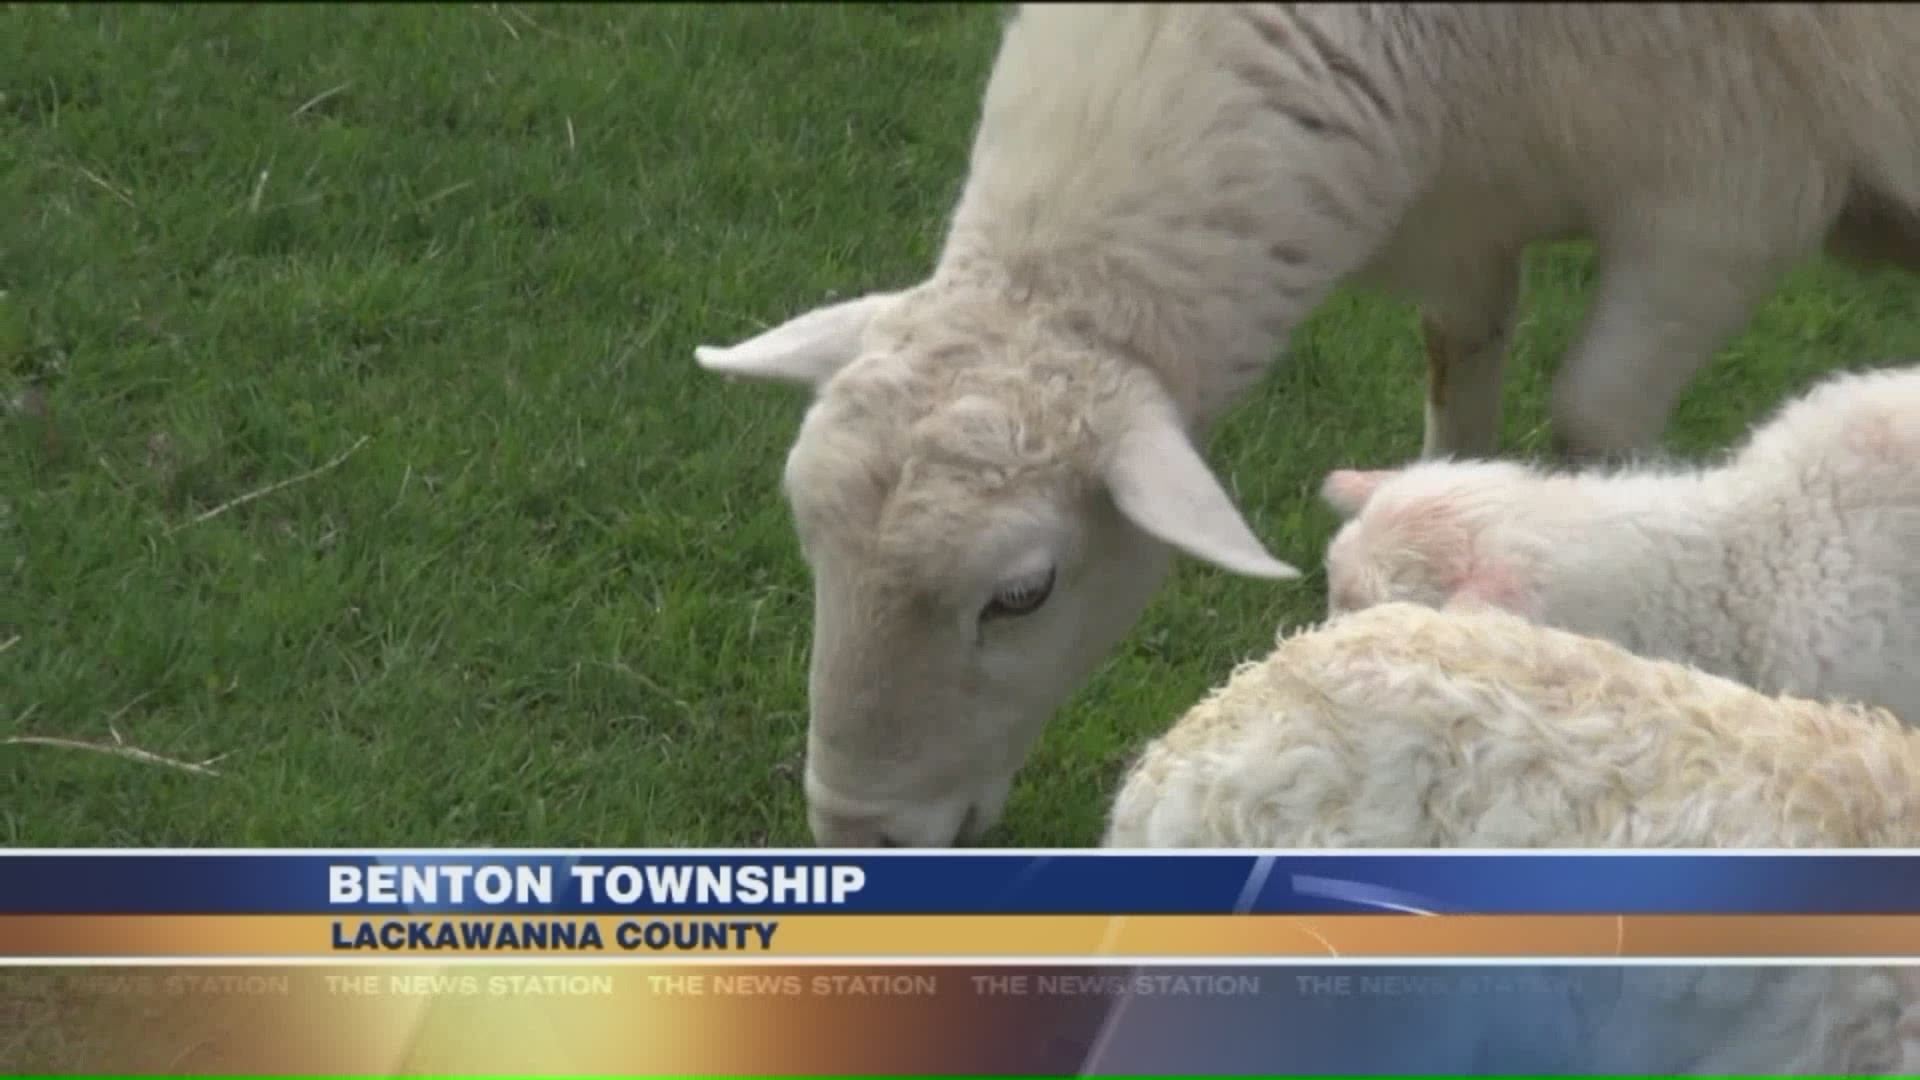 Benton Township Farm Welcomes Lambs for Easter